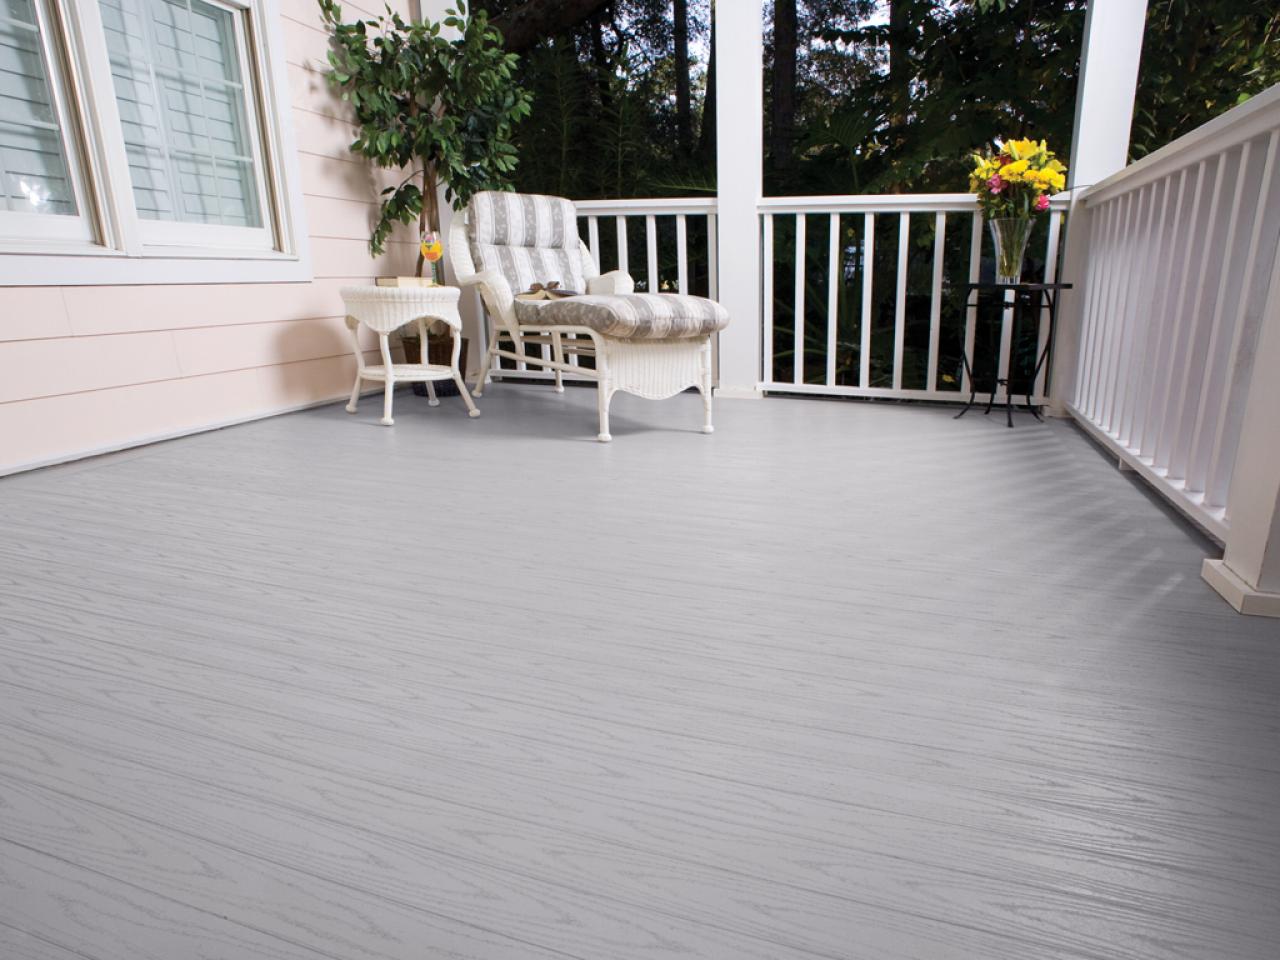 Porch Flooring And Foundation, What Can I Cover My Wood Deck Floor With